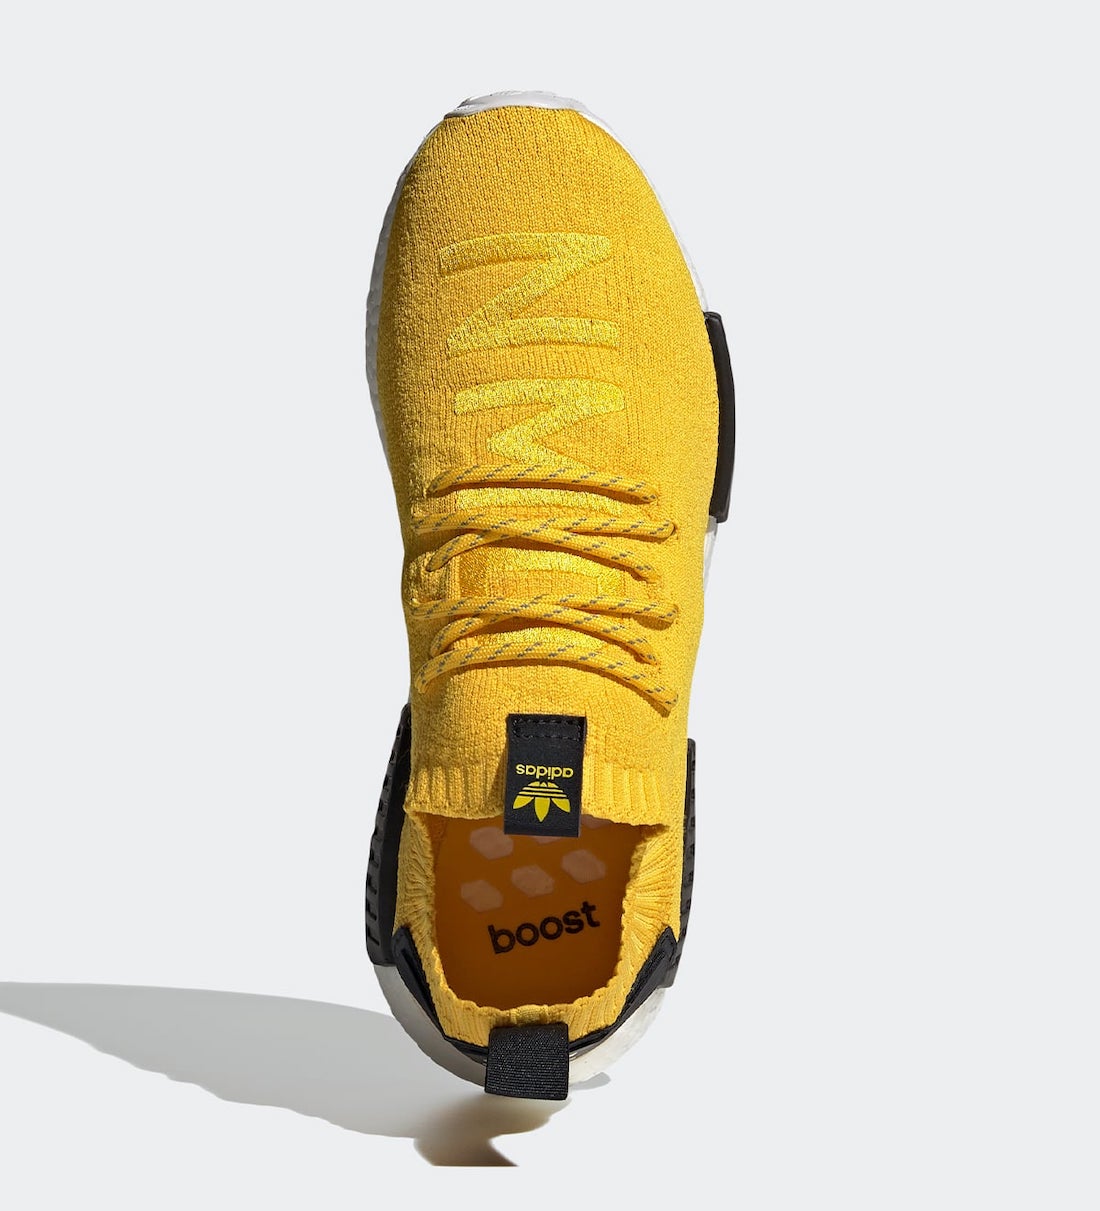 adidas NMD R1 Primeknit EQT Yellow S23749 Release Date Info